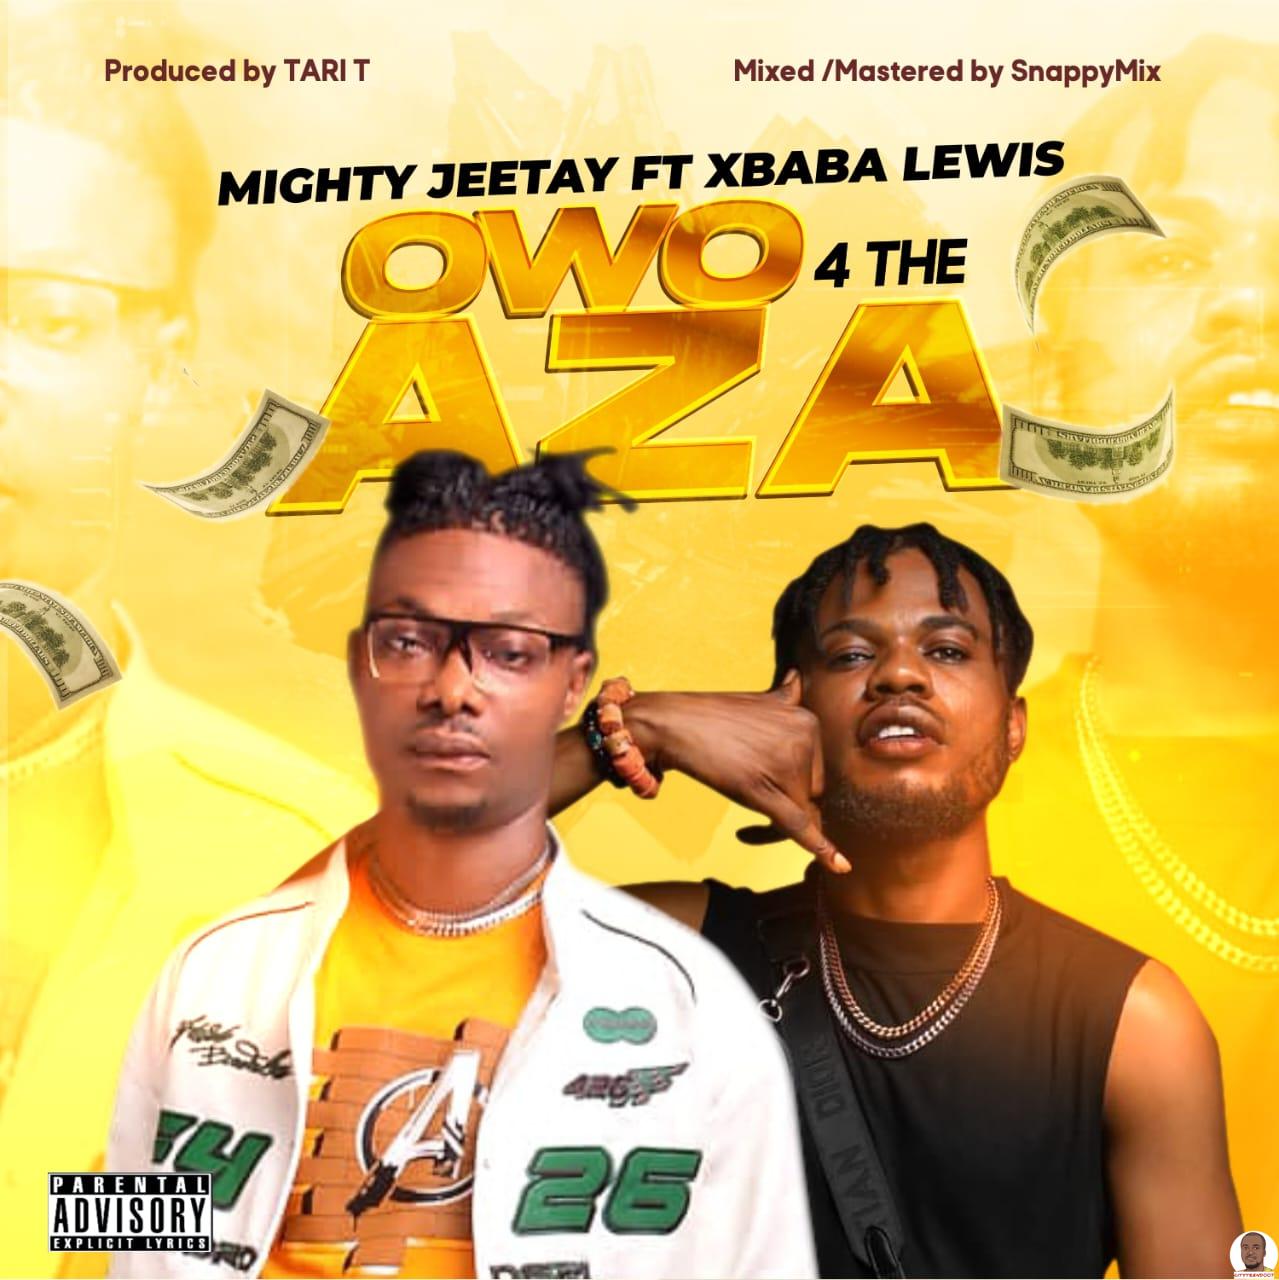 Mighty Jeetay ft. Xbaba Lewis Owo 4 The Aza Mp3 Download Audio